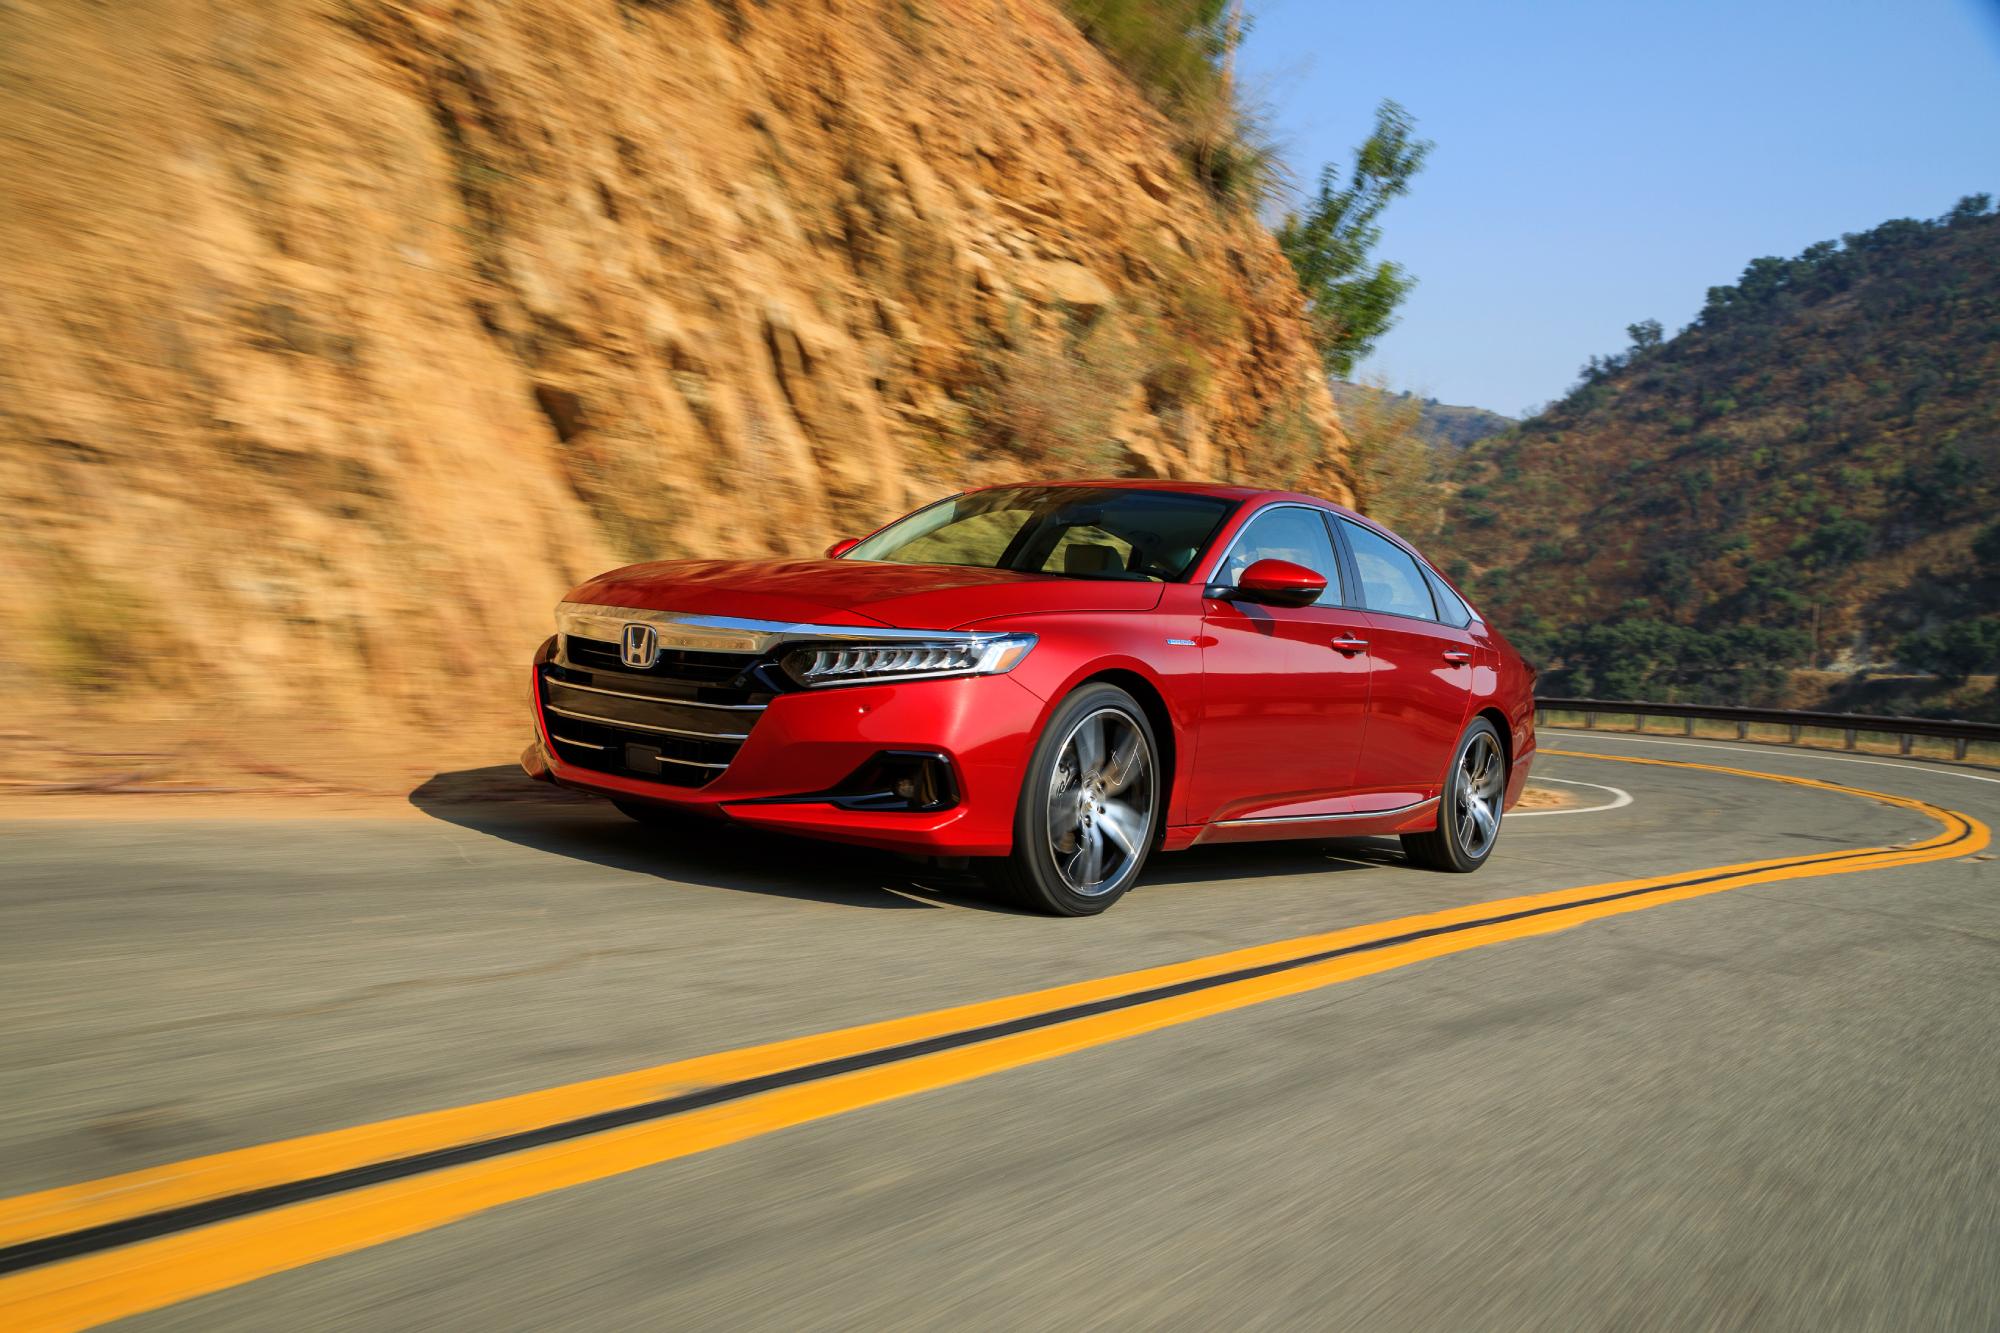 The 2022 Honda Accord offers great features at a good price.